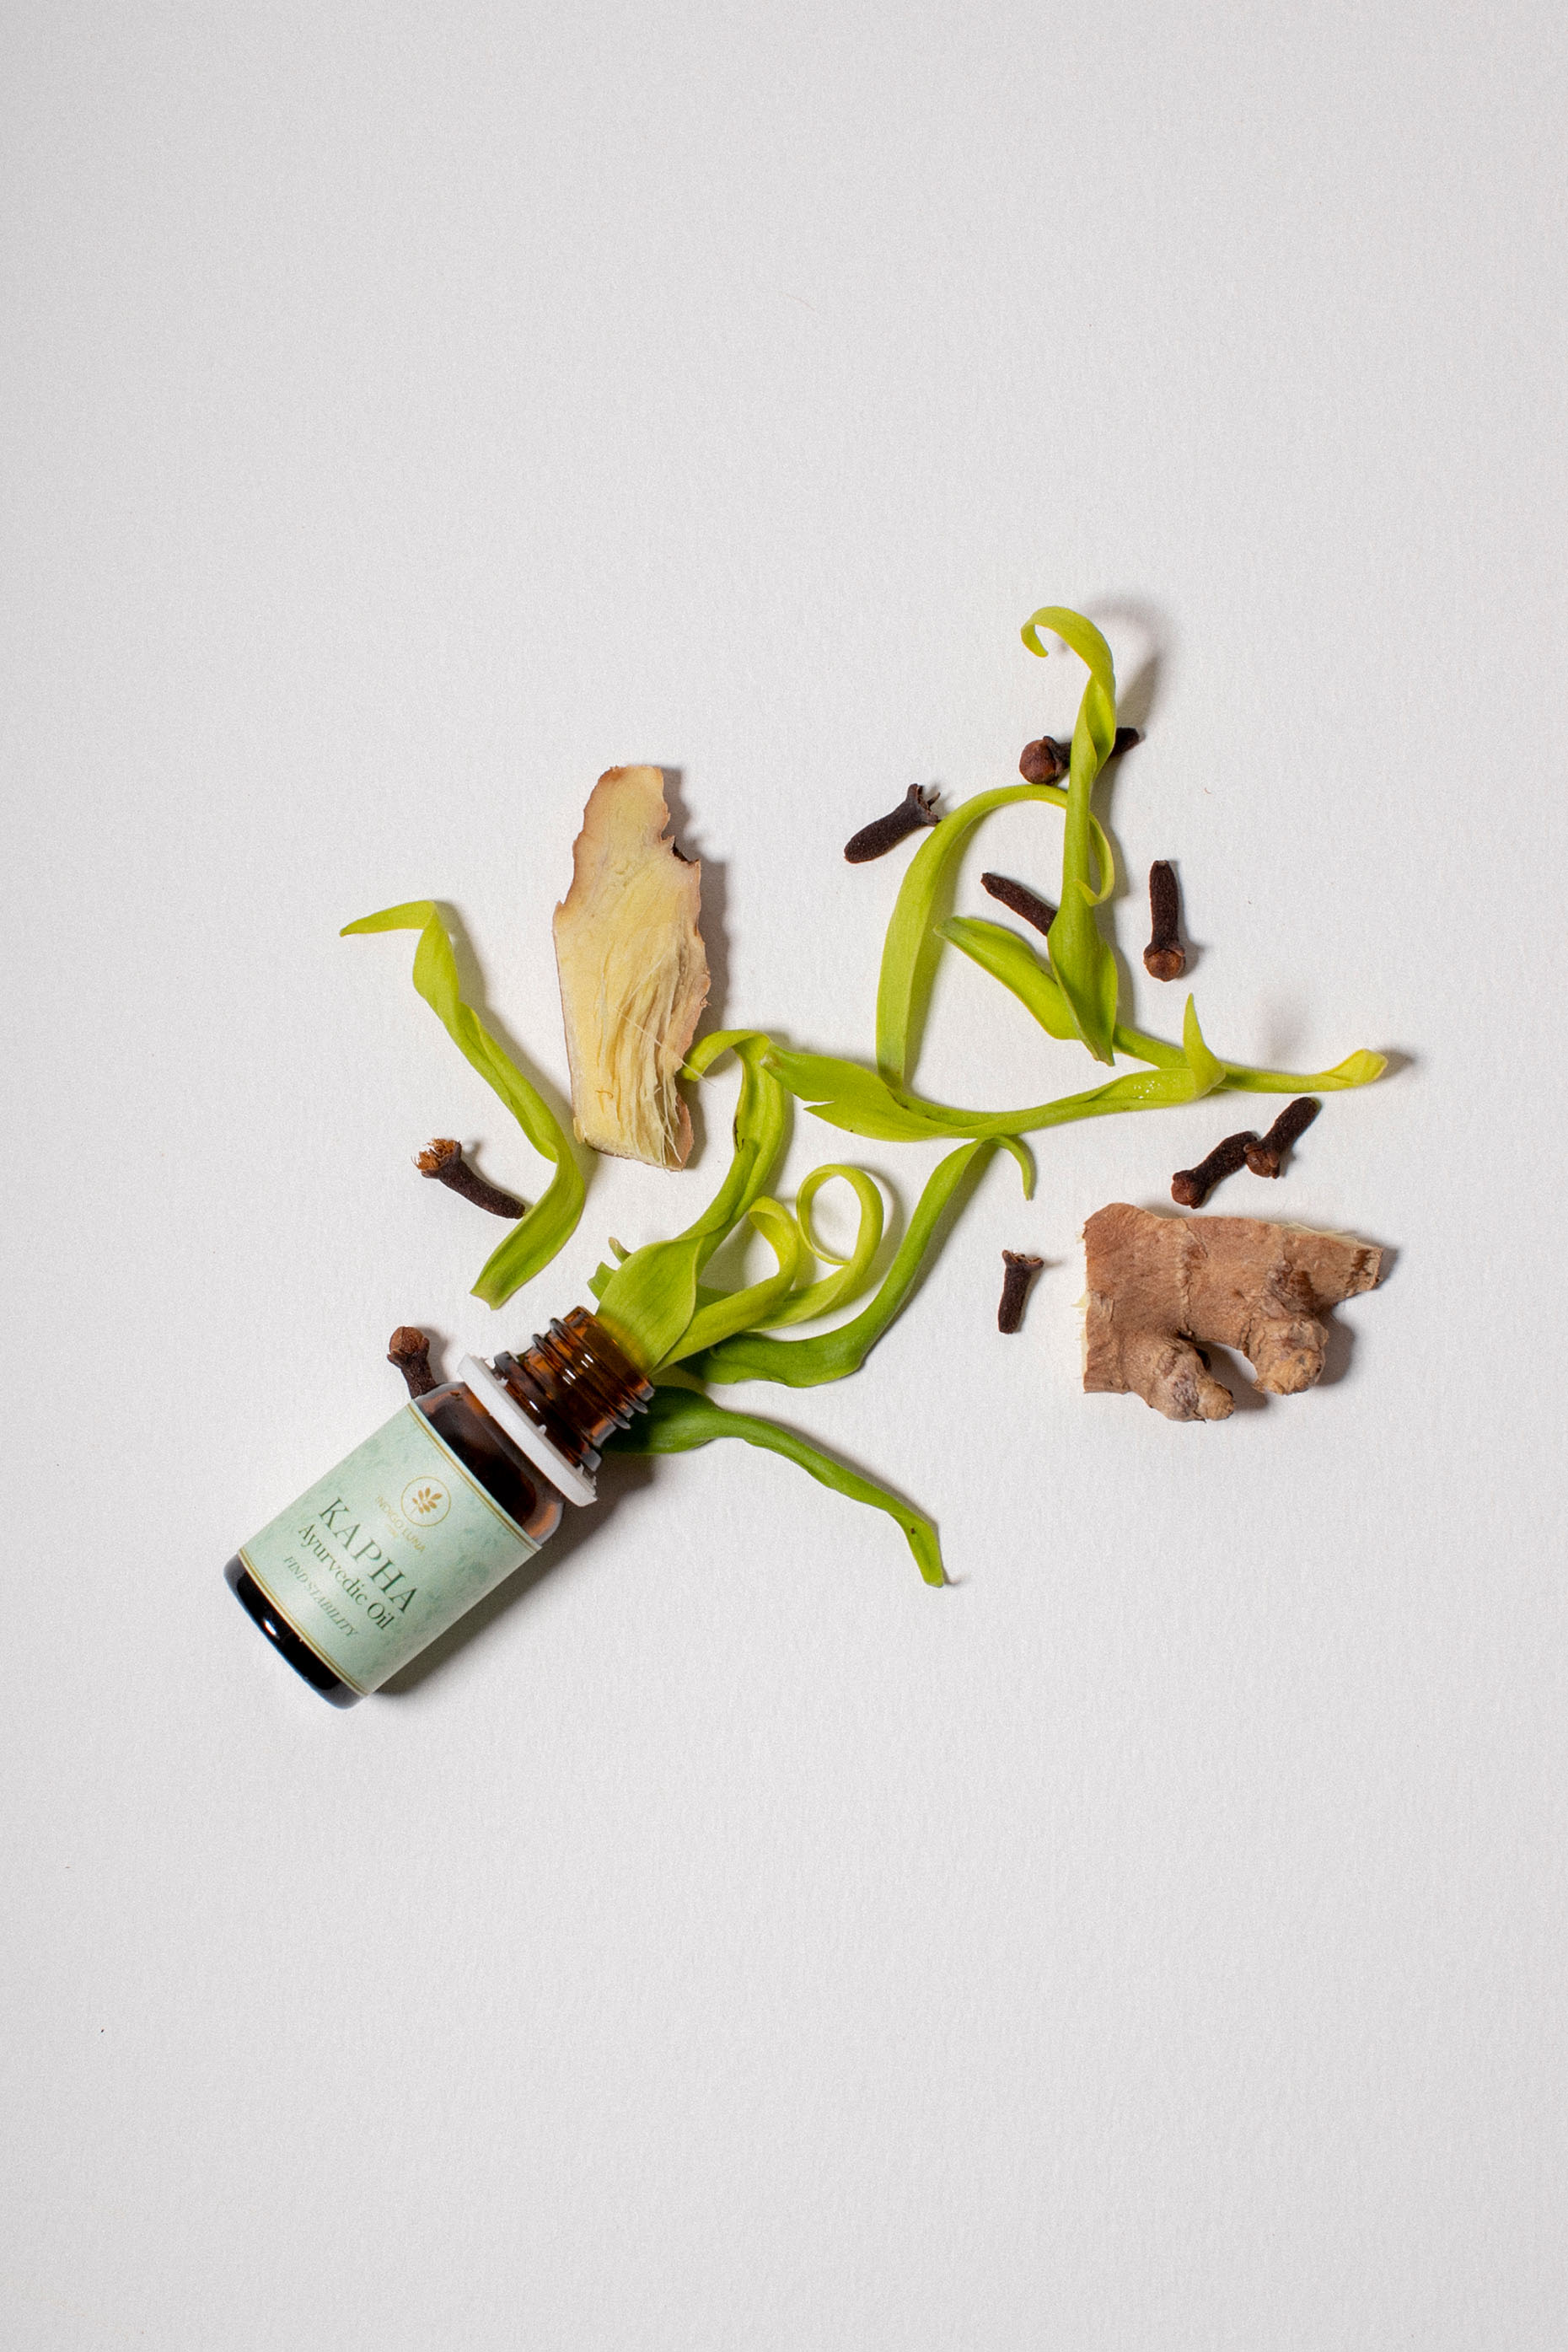 Ayurvedic essential oil for Kapha Dosha, image showing natural herbs coming out of the bottle